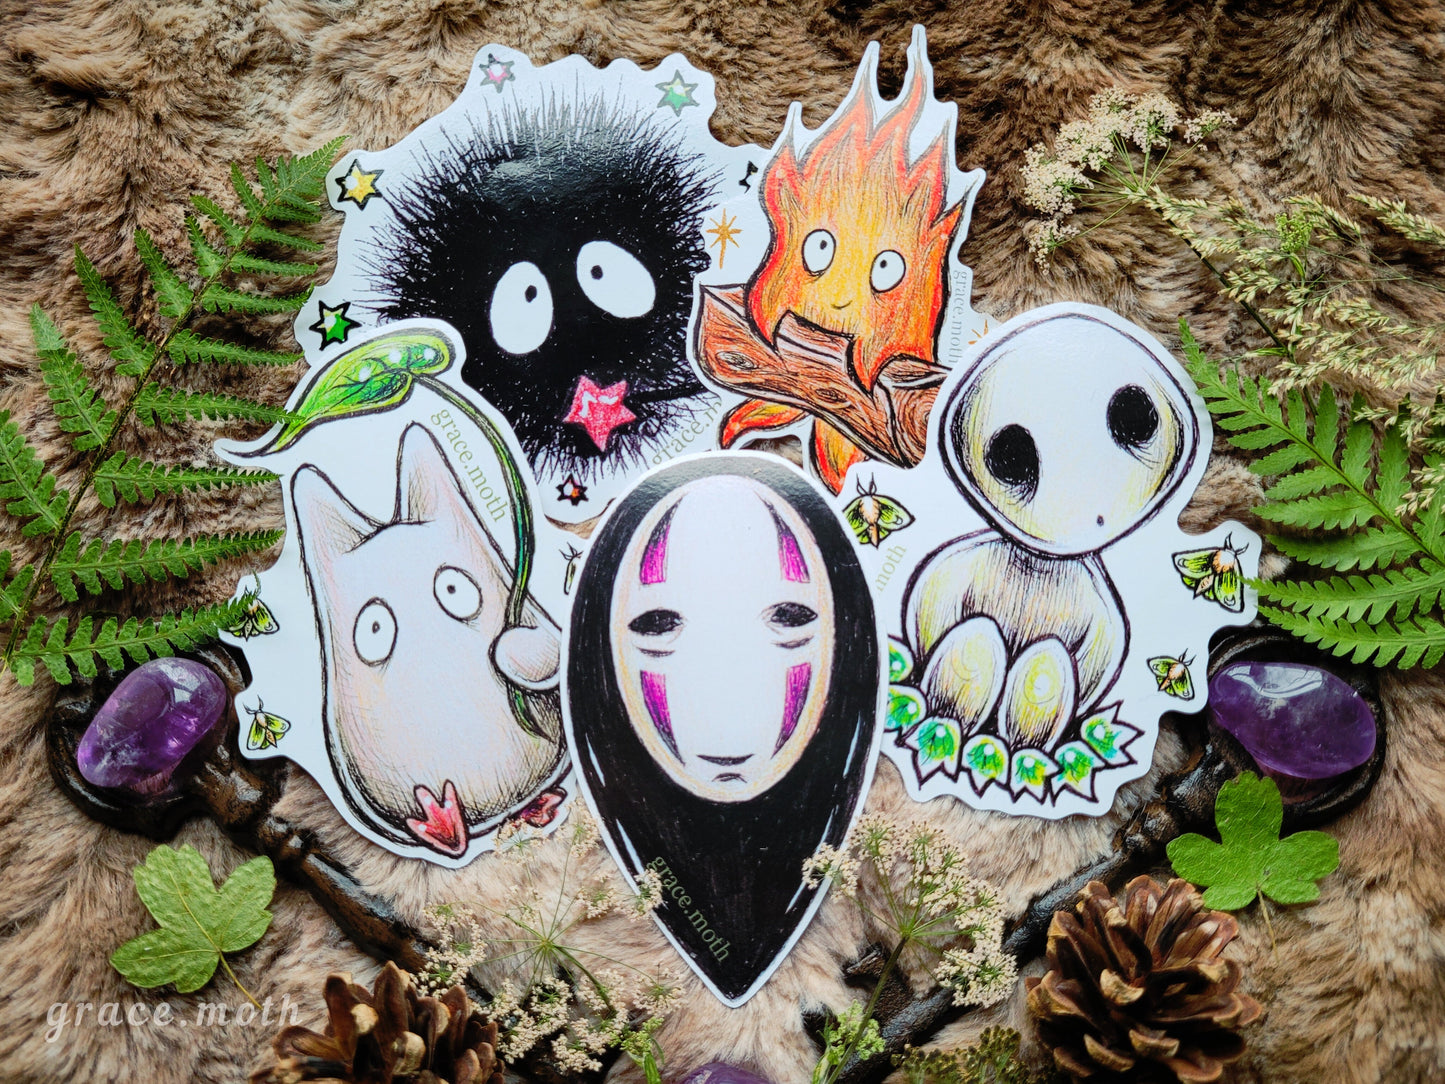 Nature spirit - Vinyl Sticker 10cm - Japanese Anime inspired art - Witchy - Gothic - Illustrated by Grace moth